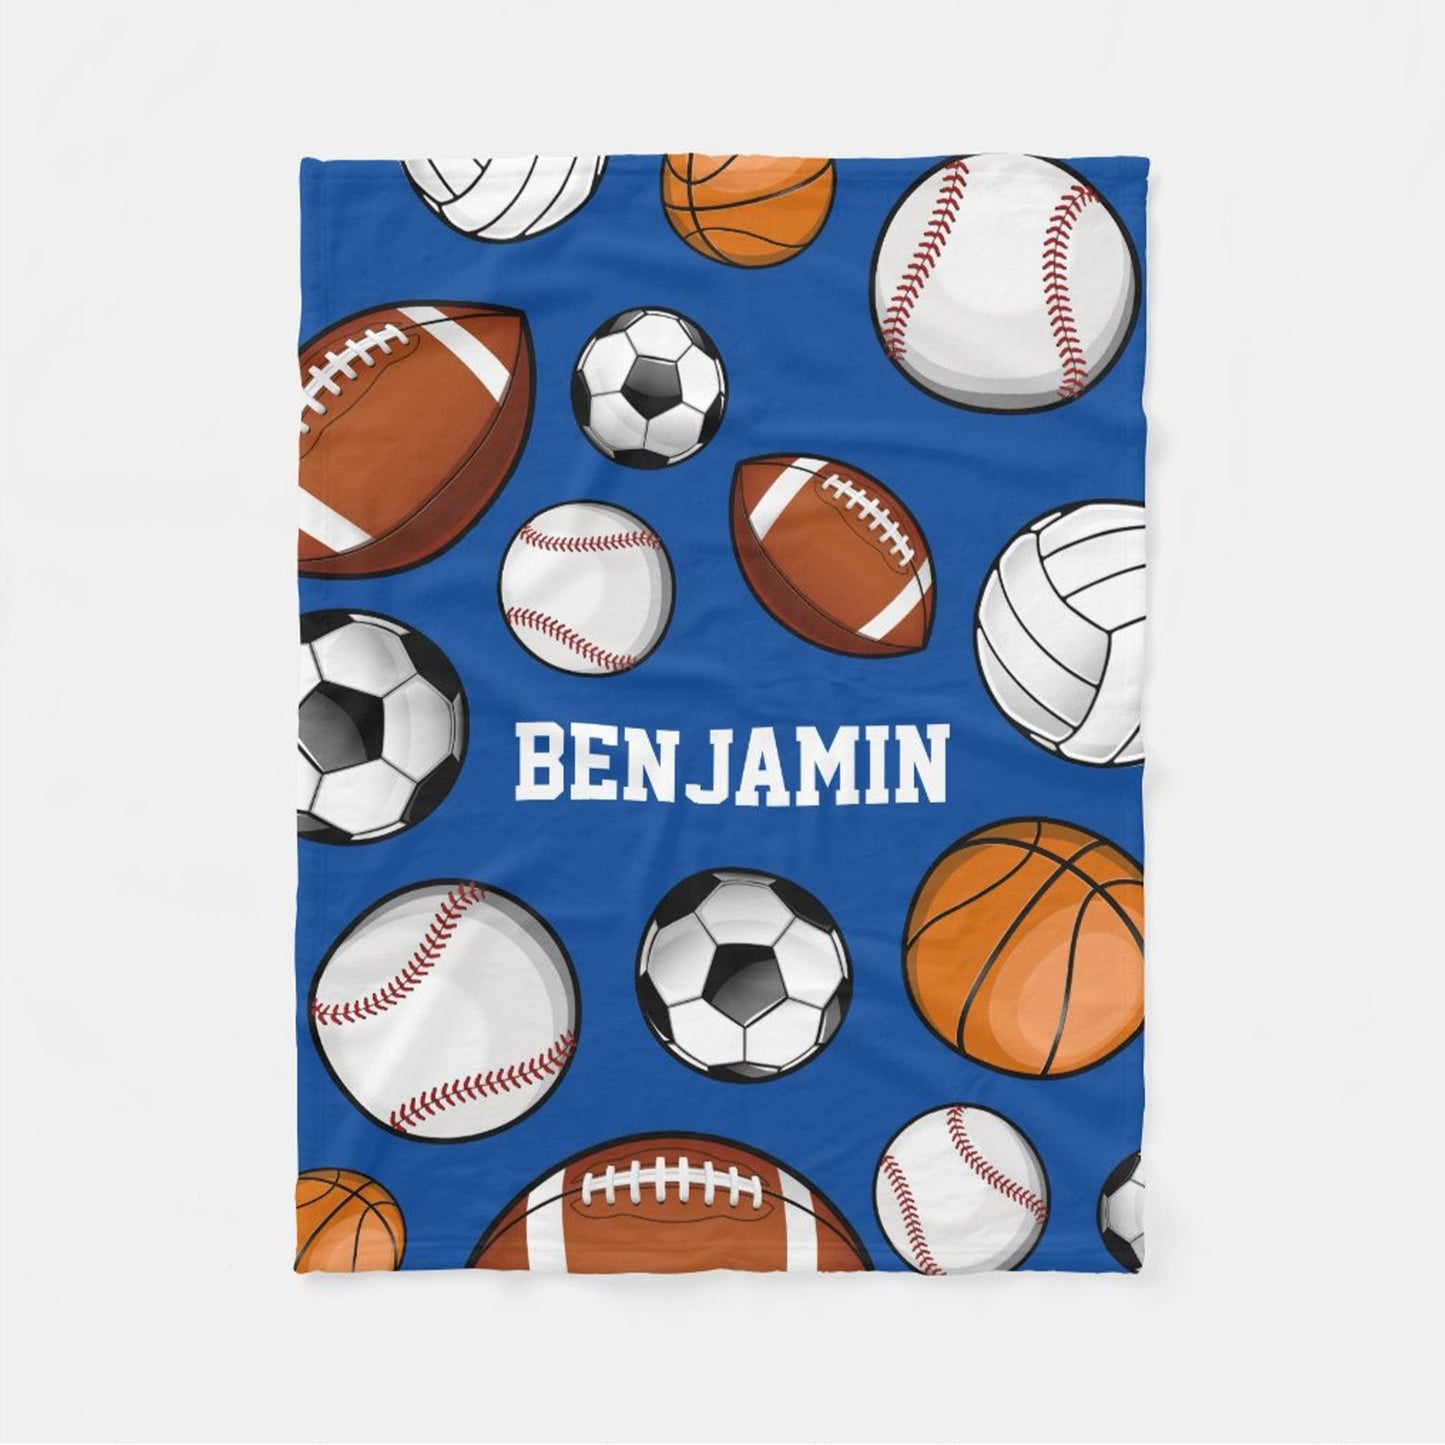 Soccer Personalize Fleece Blanket,  Soccer Blankets, Custom Soccer Gifts For Coach And Soccer Players, Custom Birthday Gift For Soccer Player